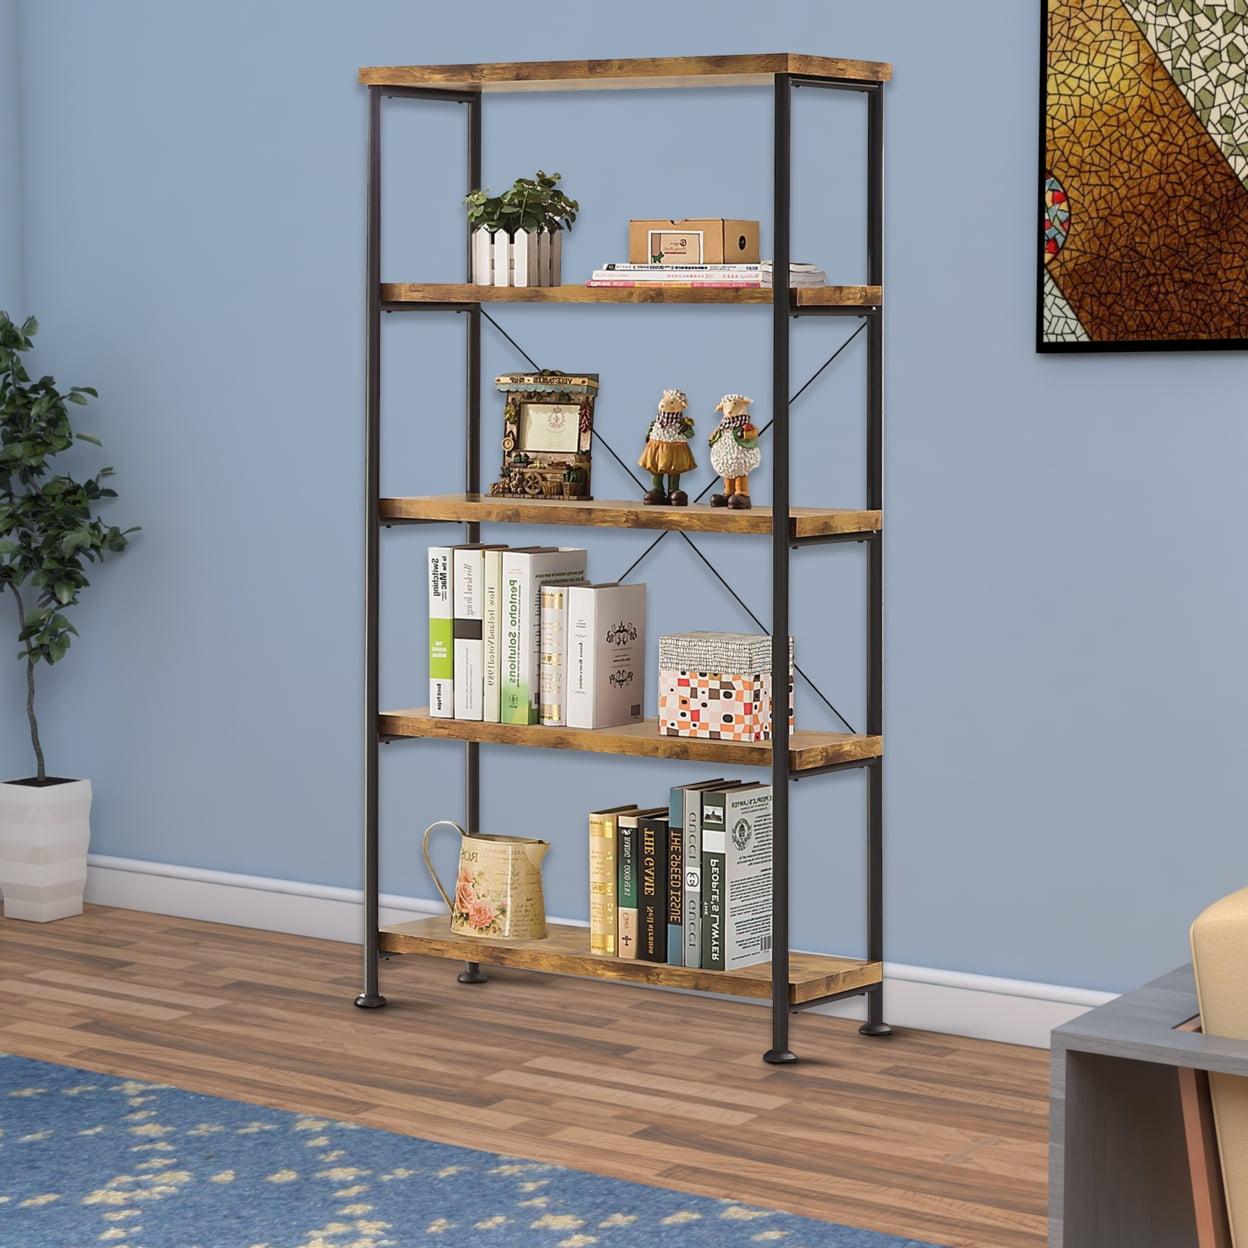 Transitional Antique Nutmeg and Black Steel Tall Bookcase